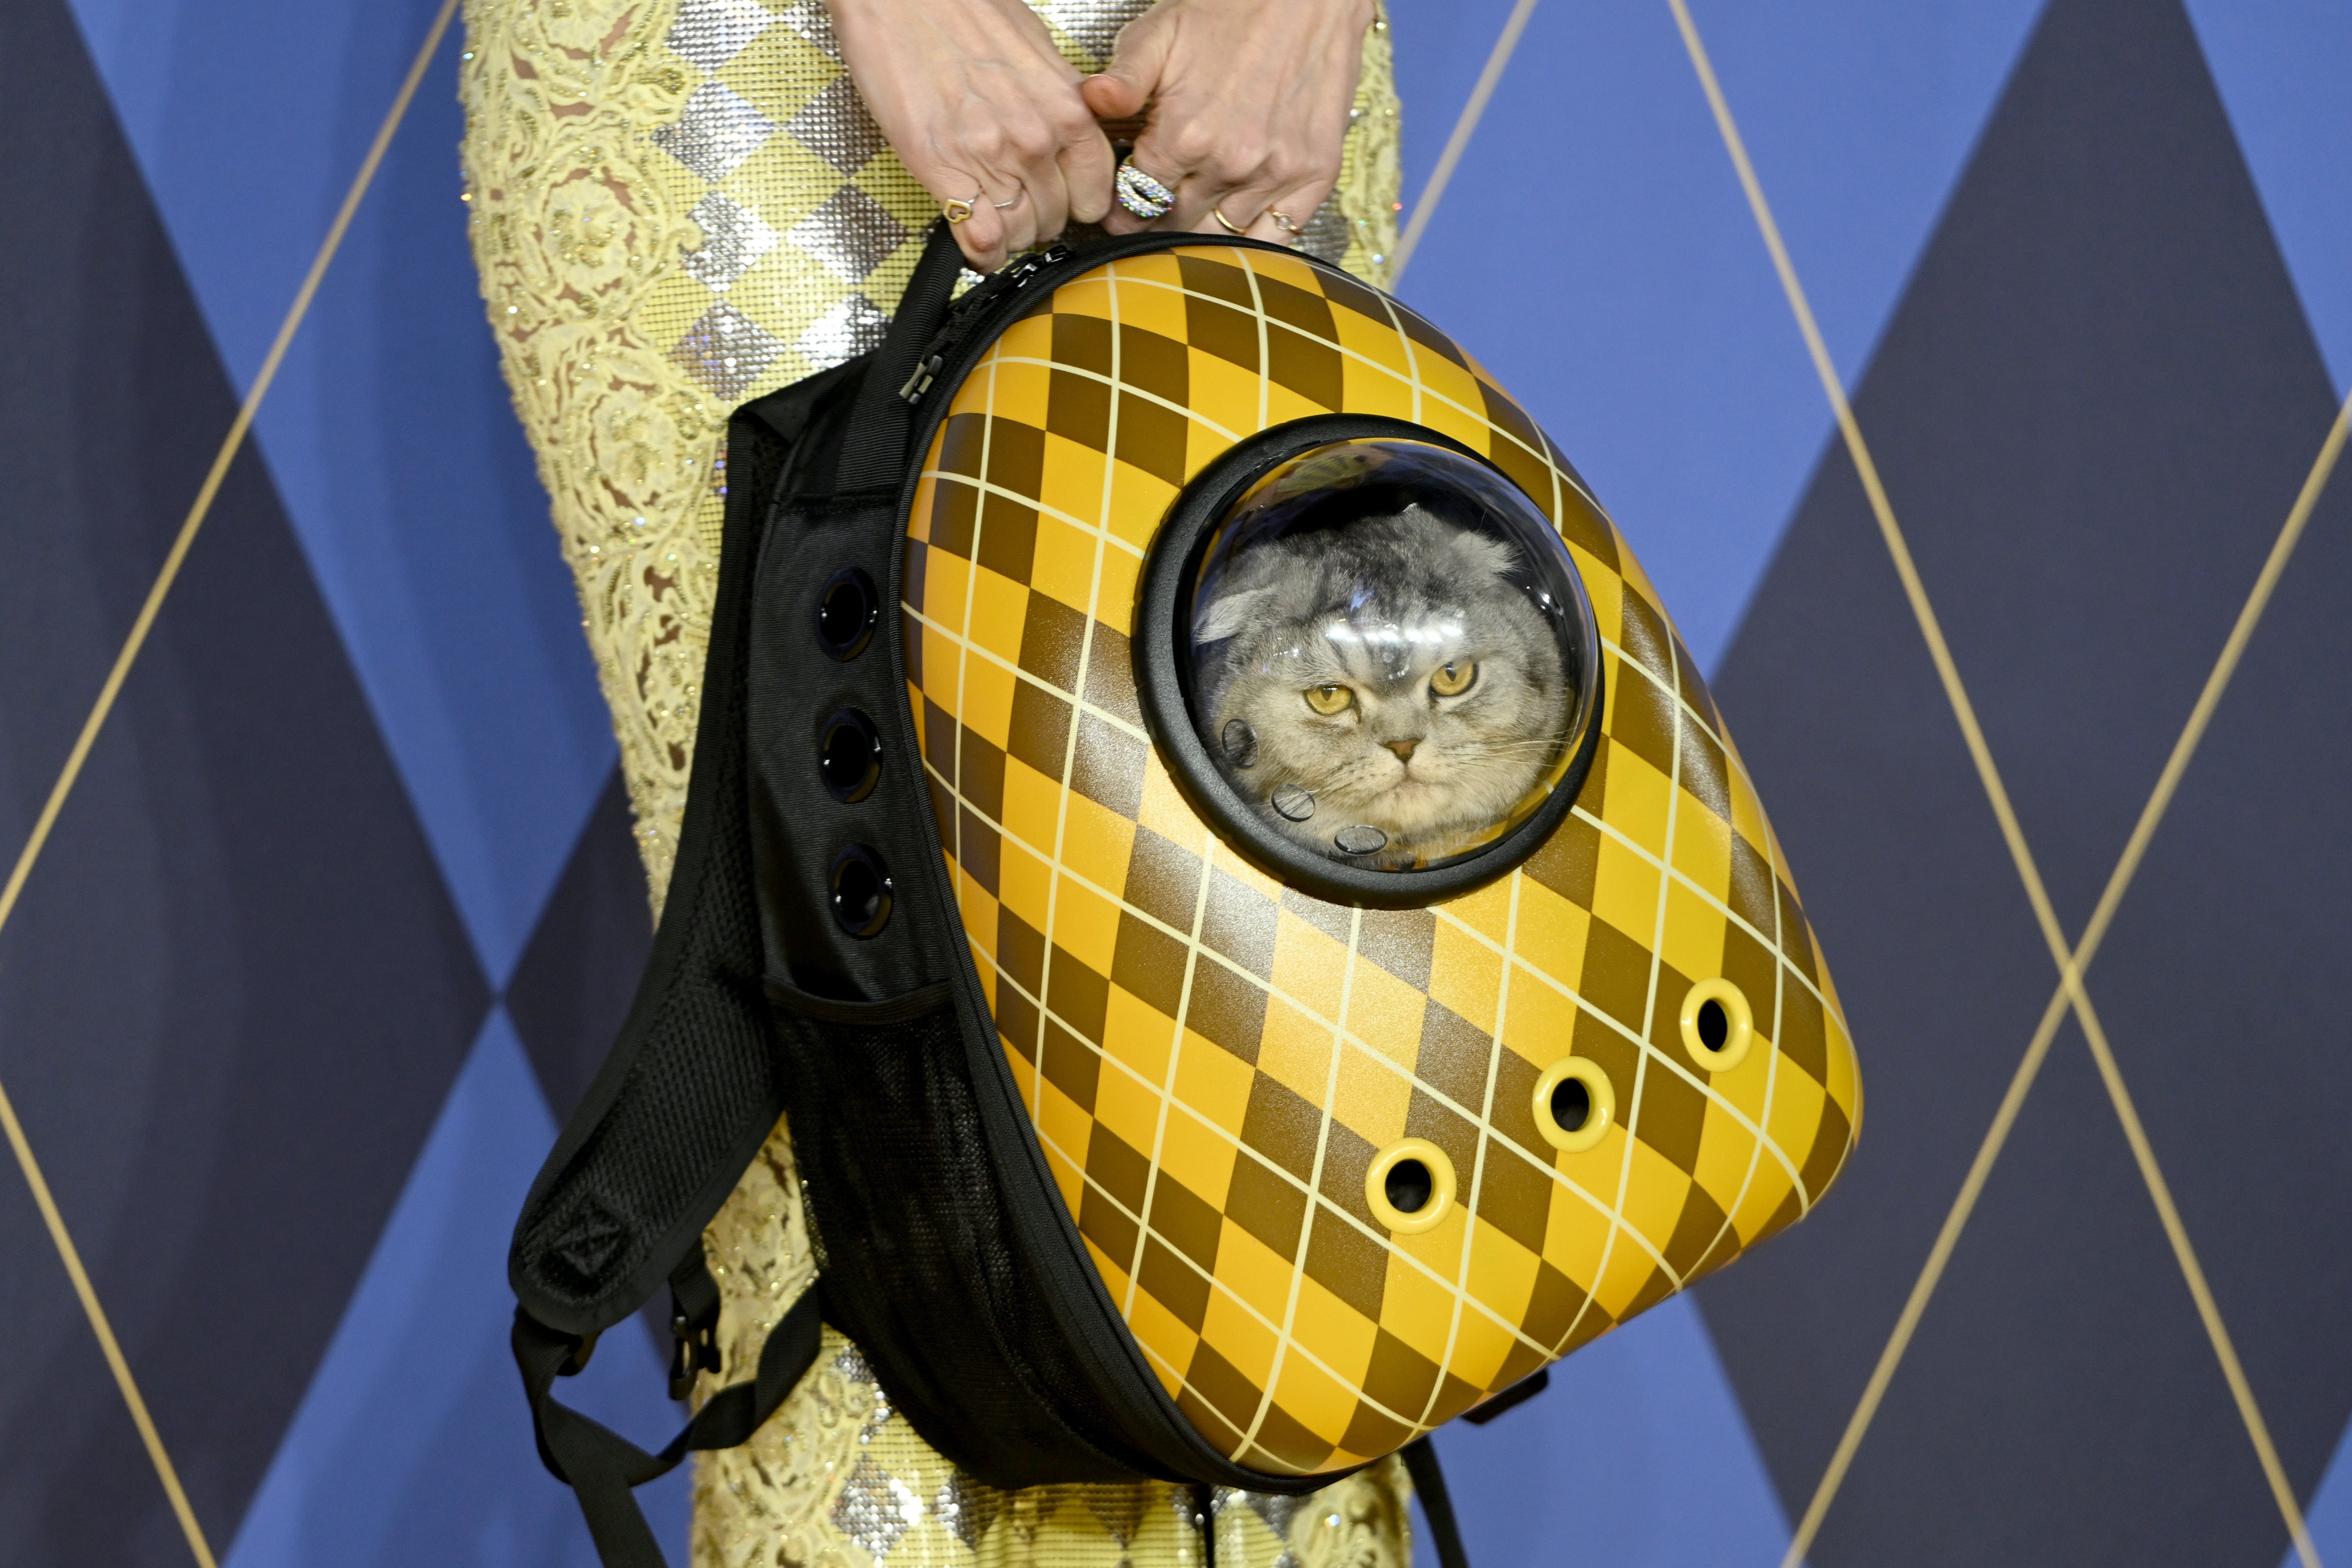 Cats Protection said it fears the film’s ‘realistic portrayal’ of the cat travelling in a backpack